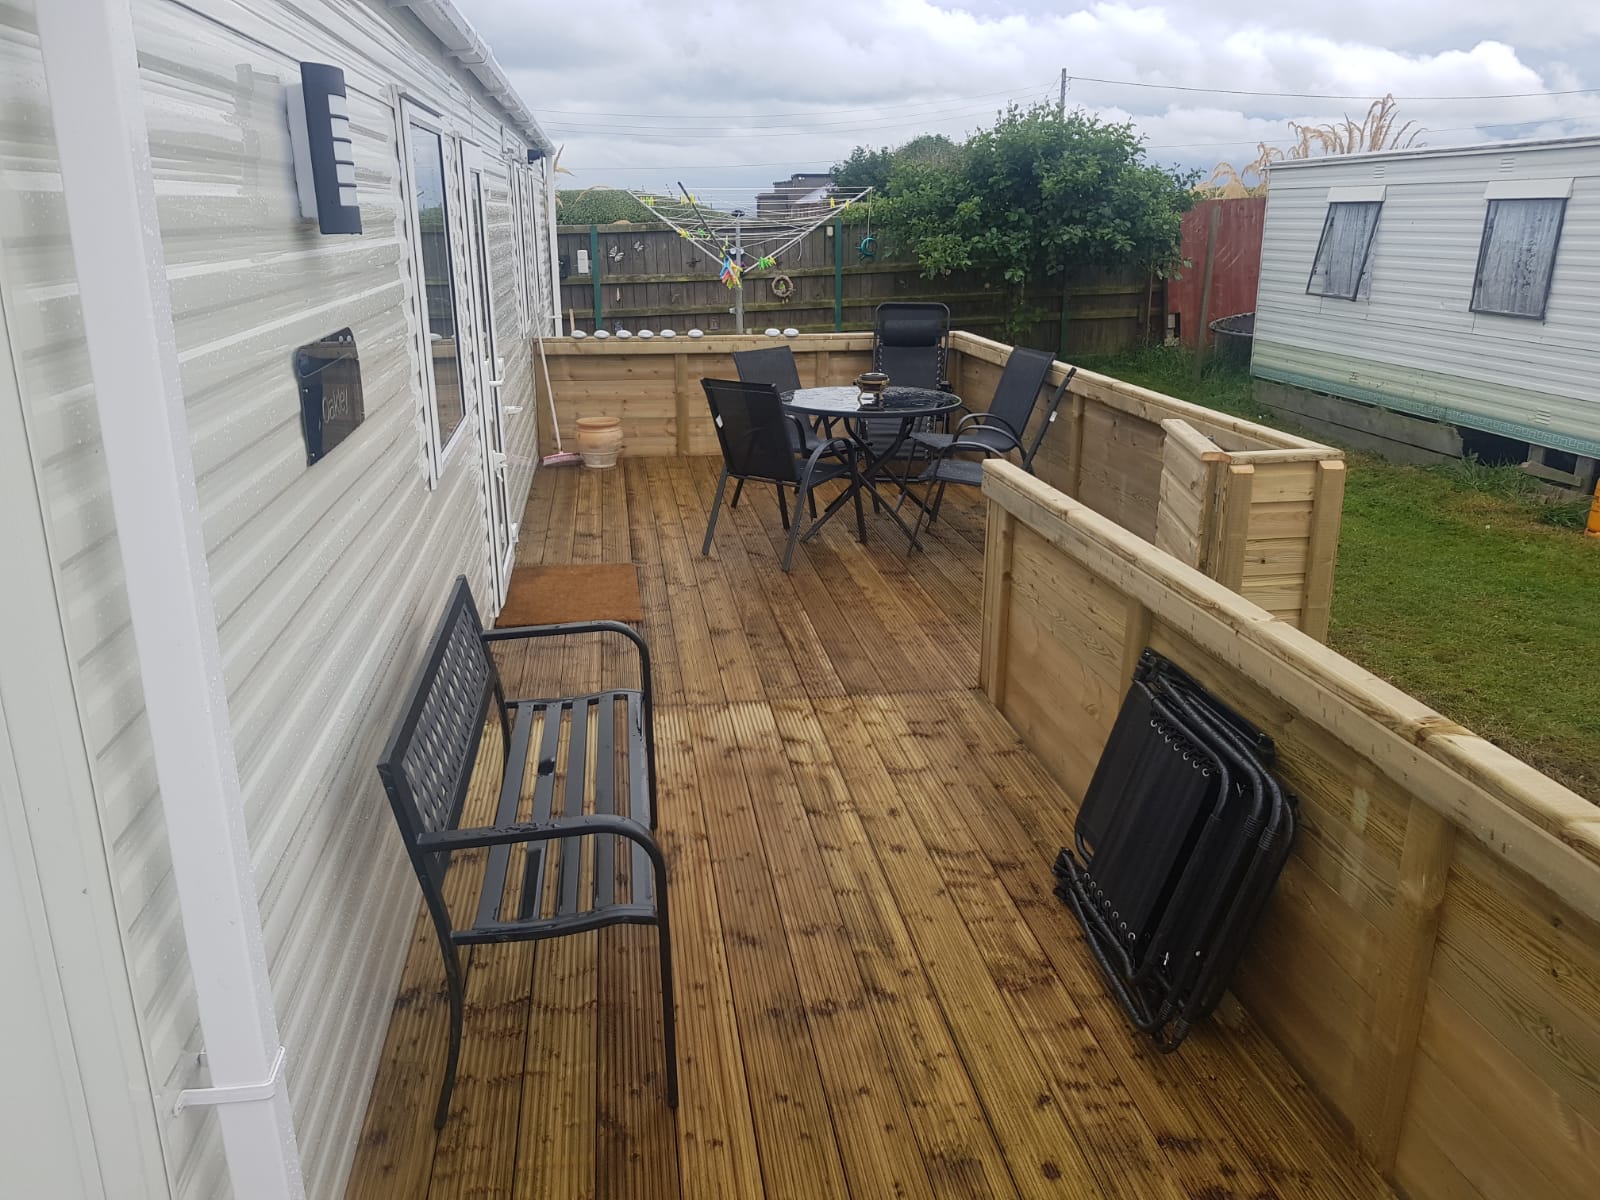 New Mobile Home & Decking Finished @ Lynders Mobile Home Park